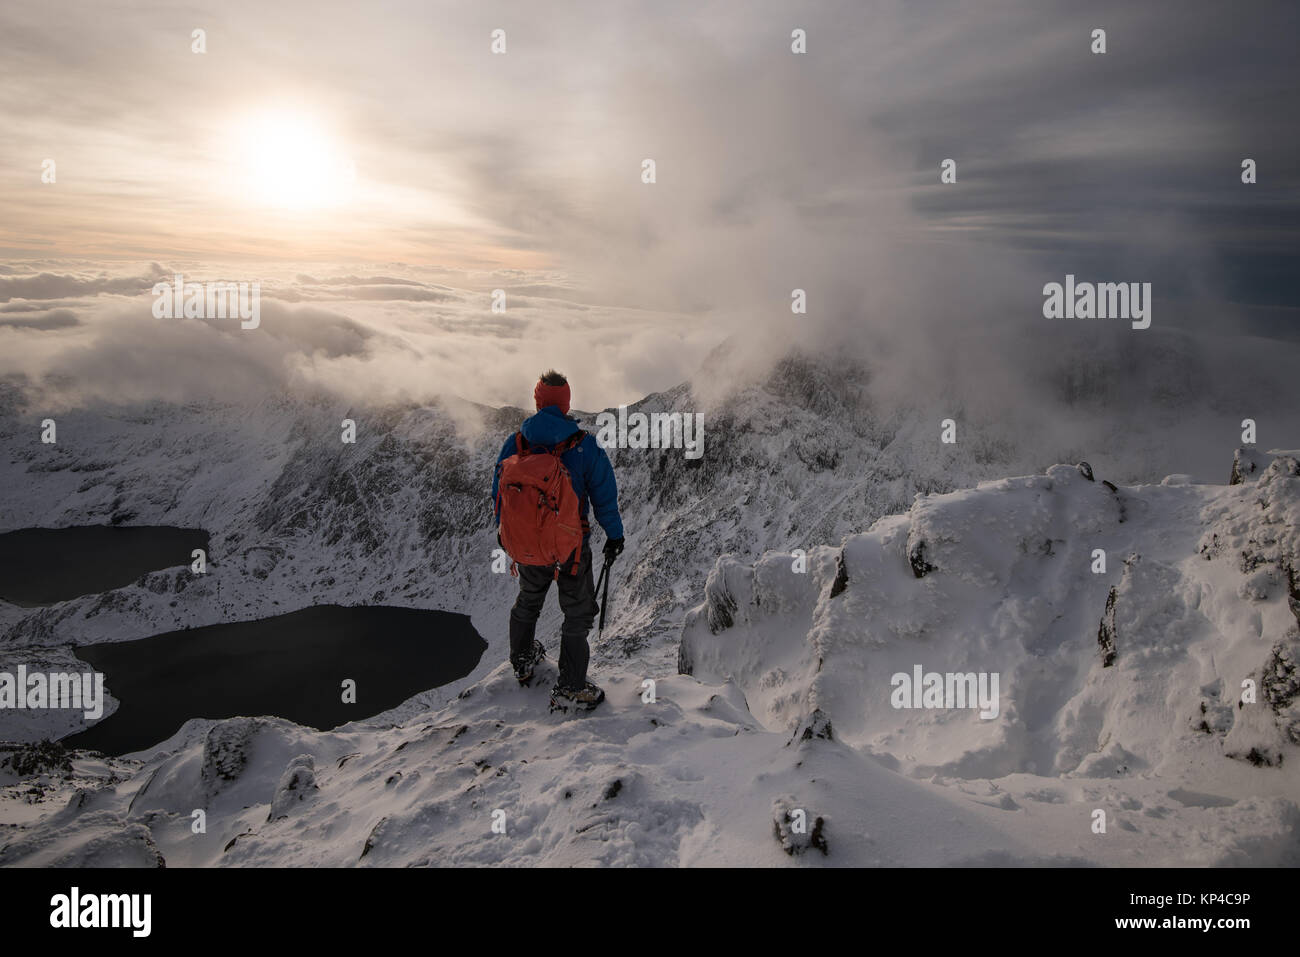 Figure in snowy mountains cape in Snowdonia, mountaineering rucksack, torchlight, Stock Photo